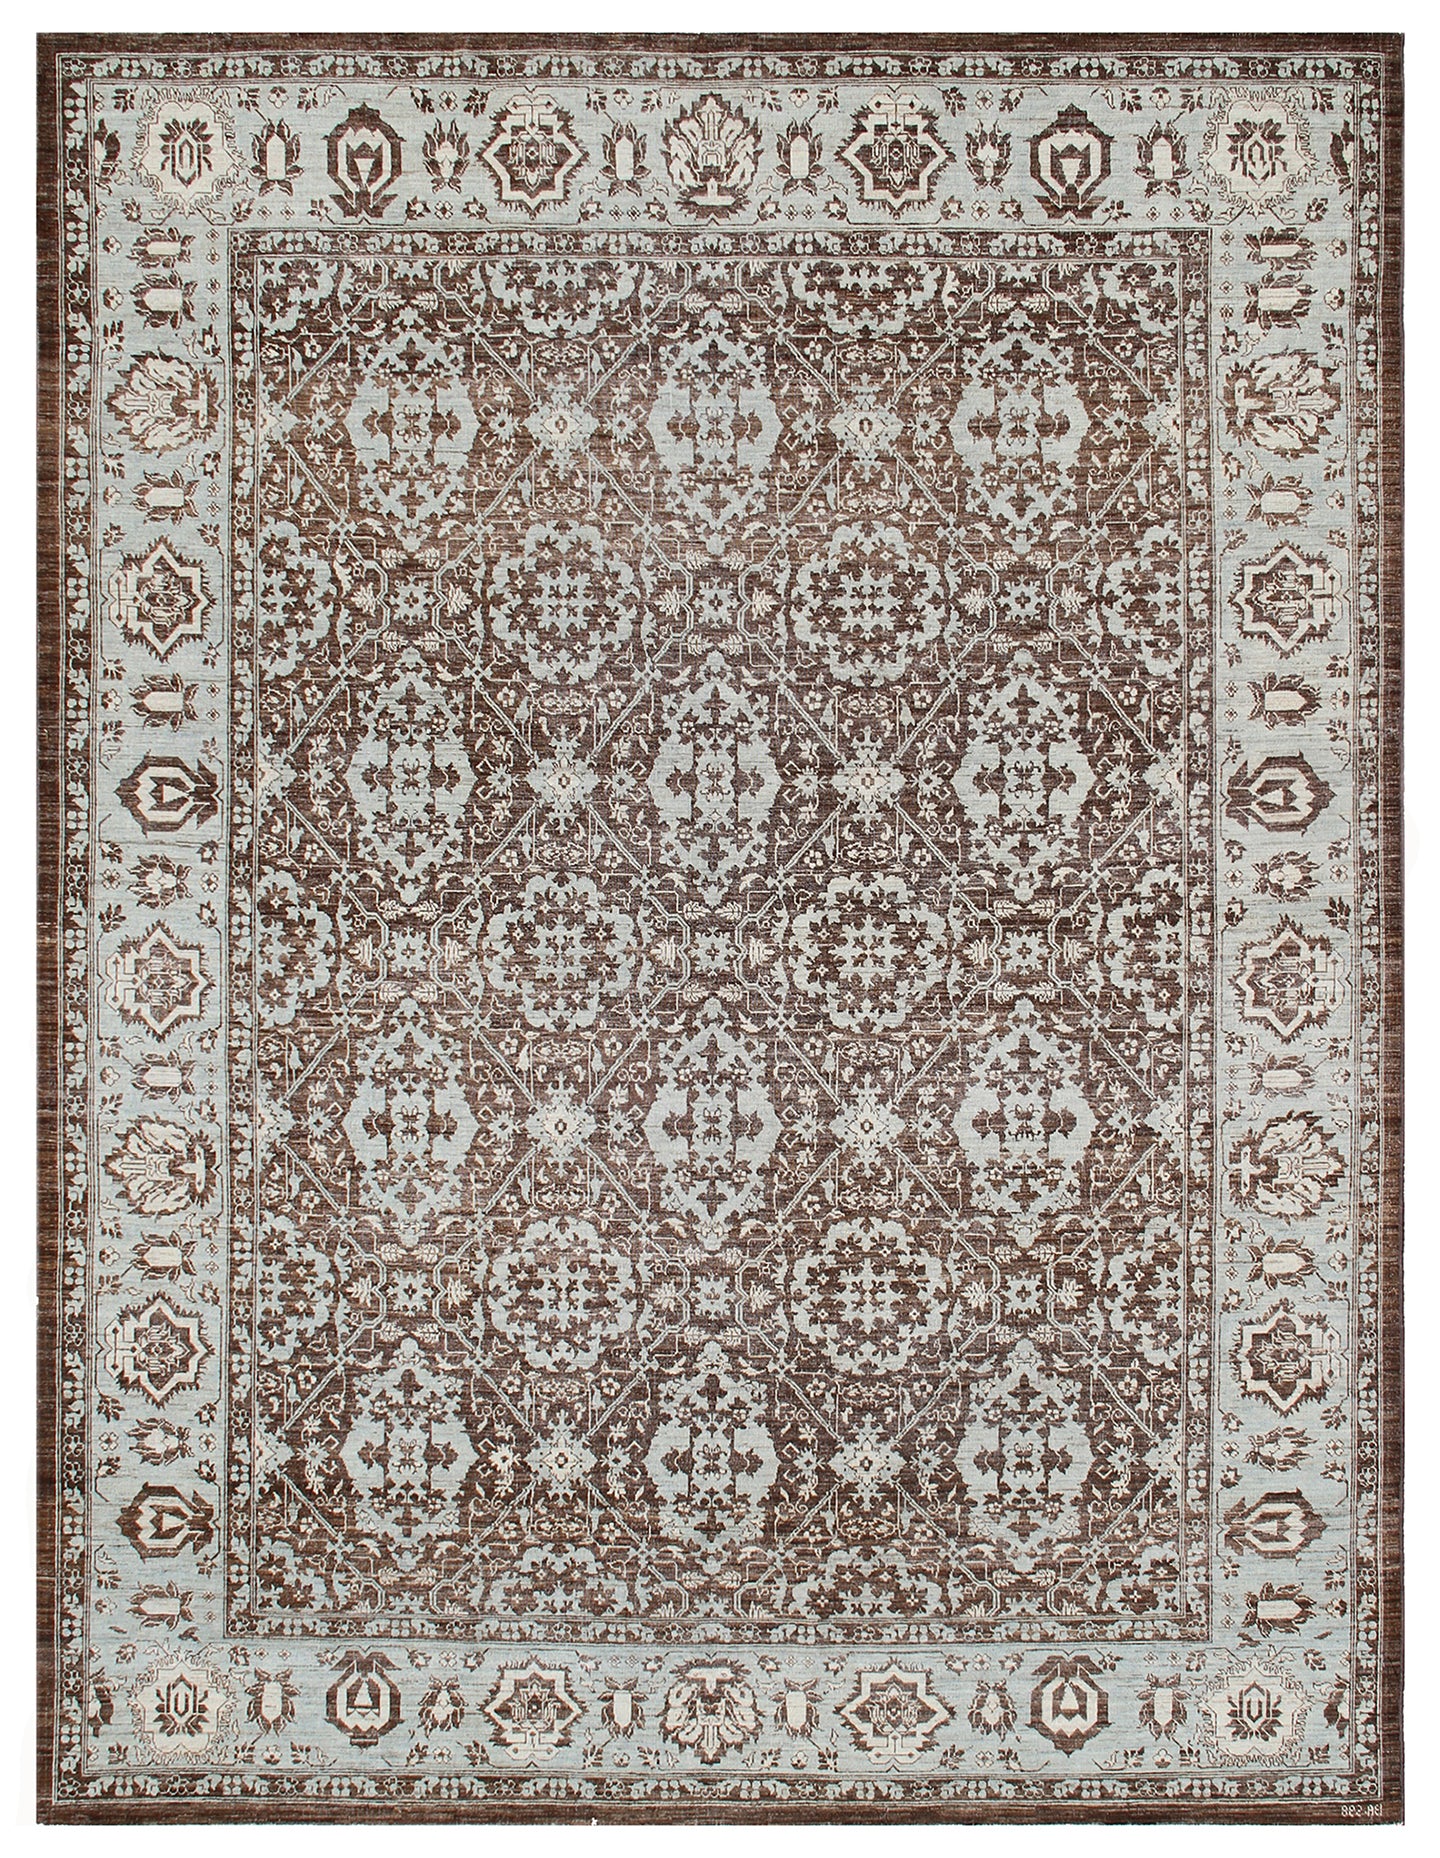 10.00 x 8.00 Fine Hand-knotted Agra Design Ariana Transitional Area Rug